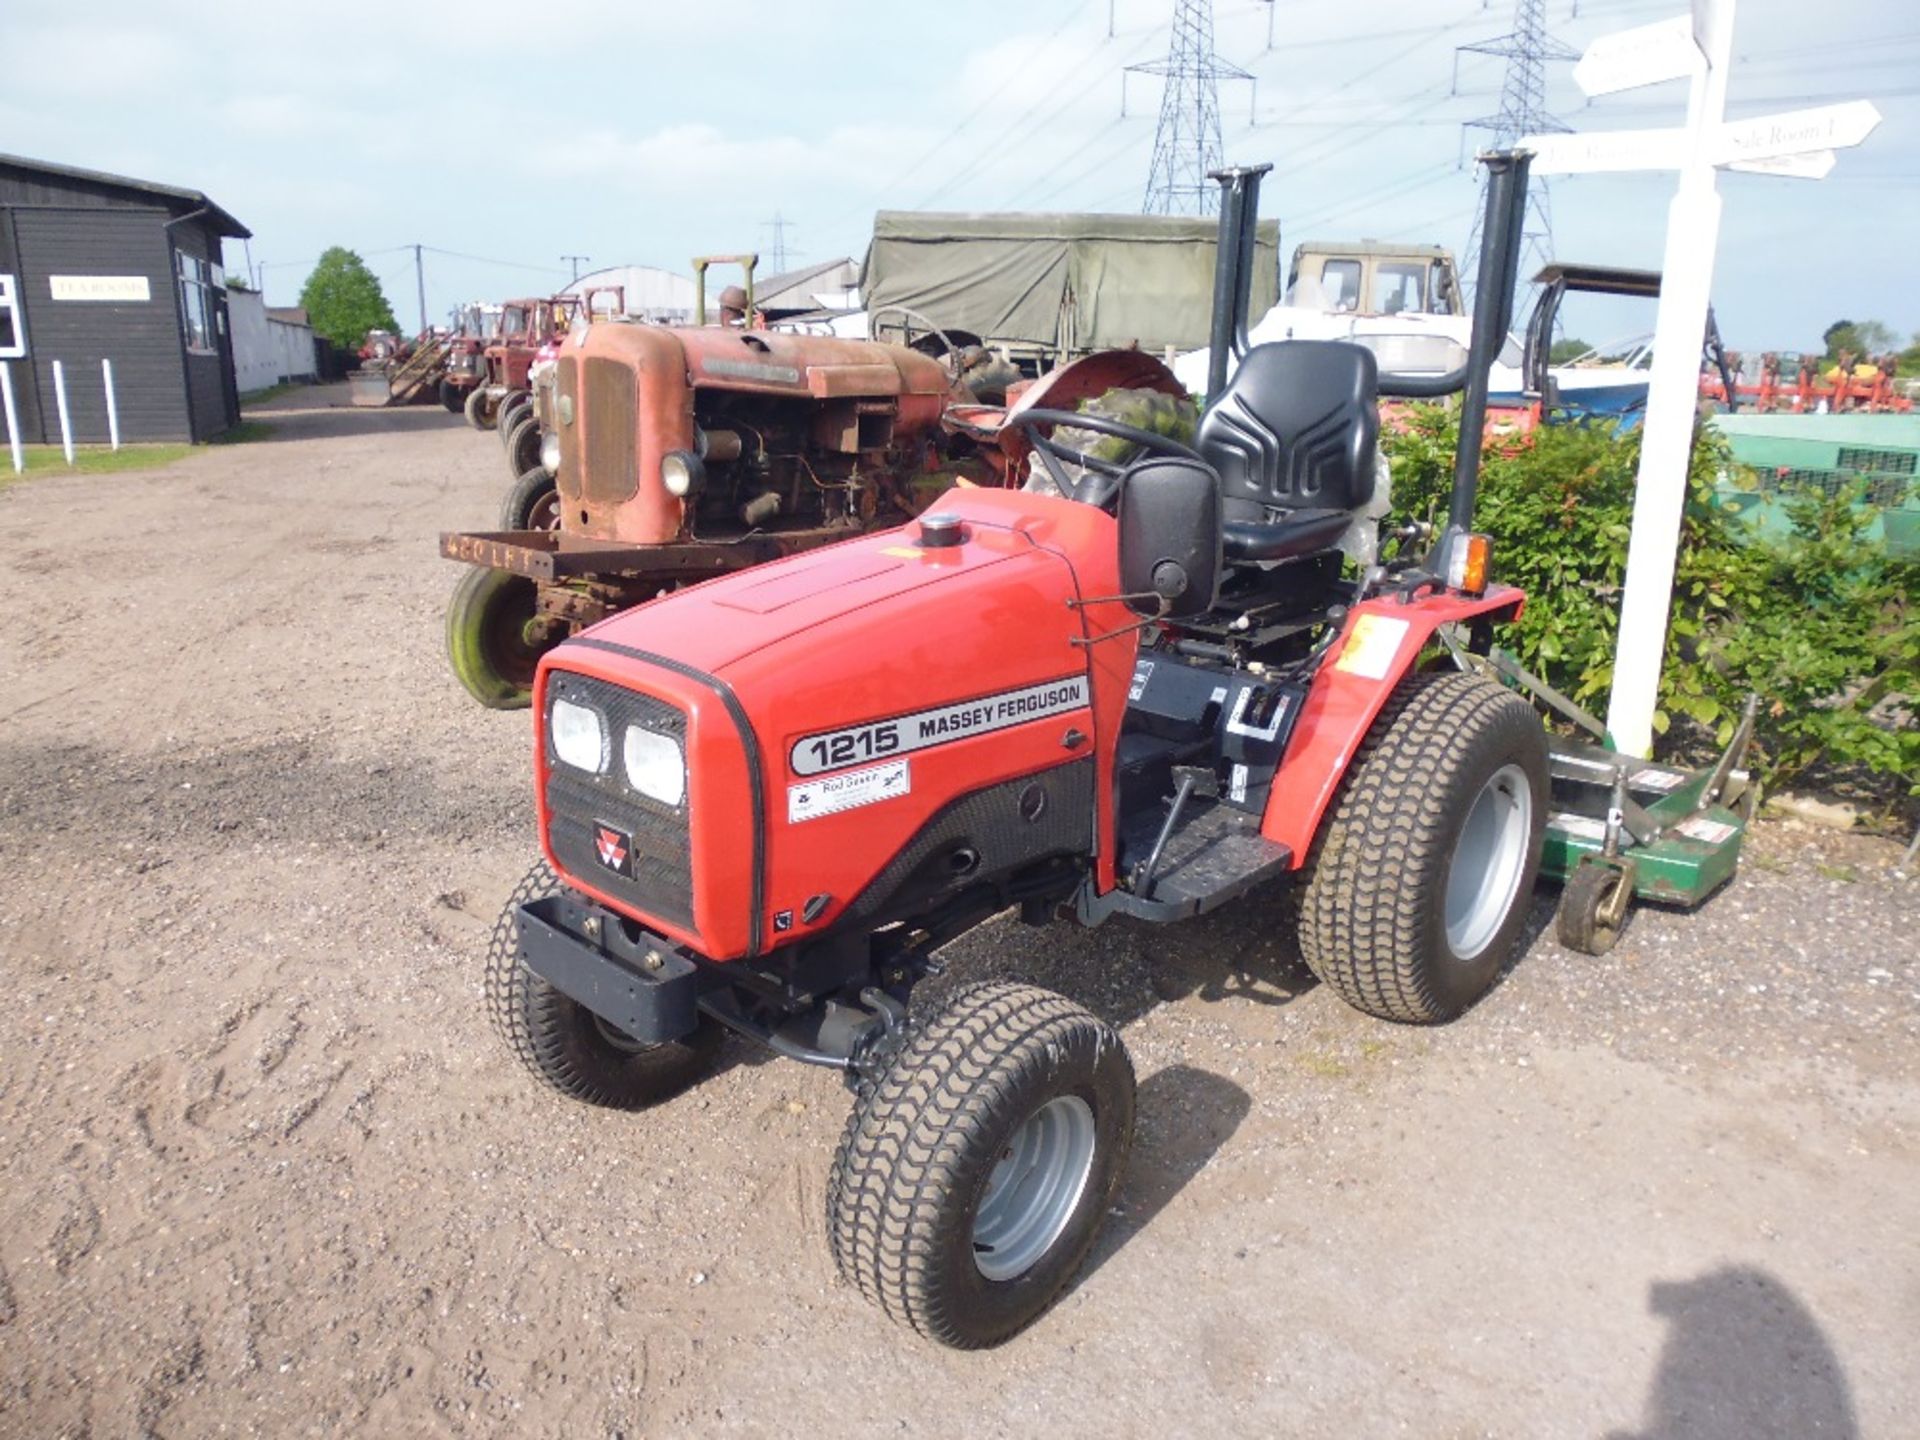 Massey Ferguson 1215 4WD compact tractor. 147 hours. Serial number N-V4902. 29 x 12.00-15. - Image 2 of 8